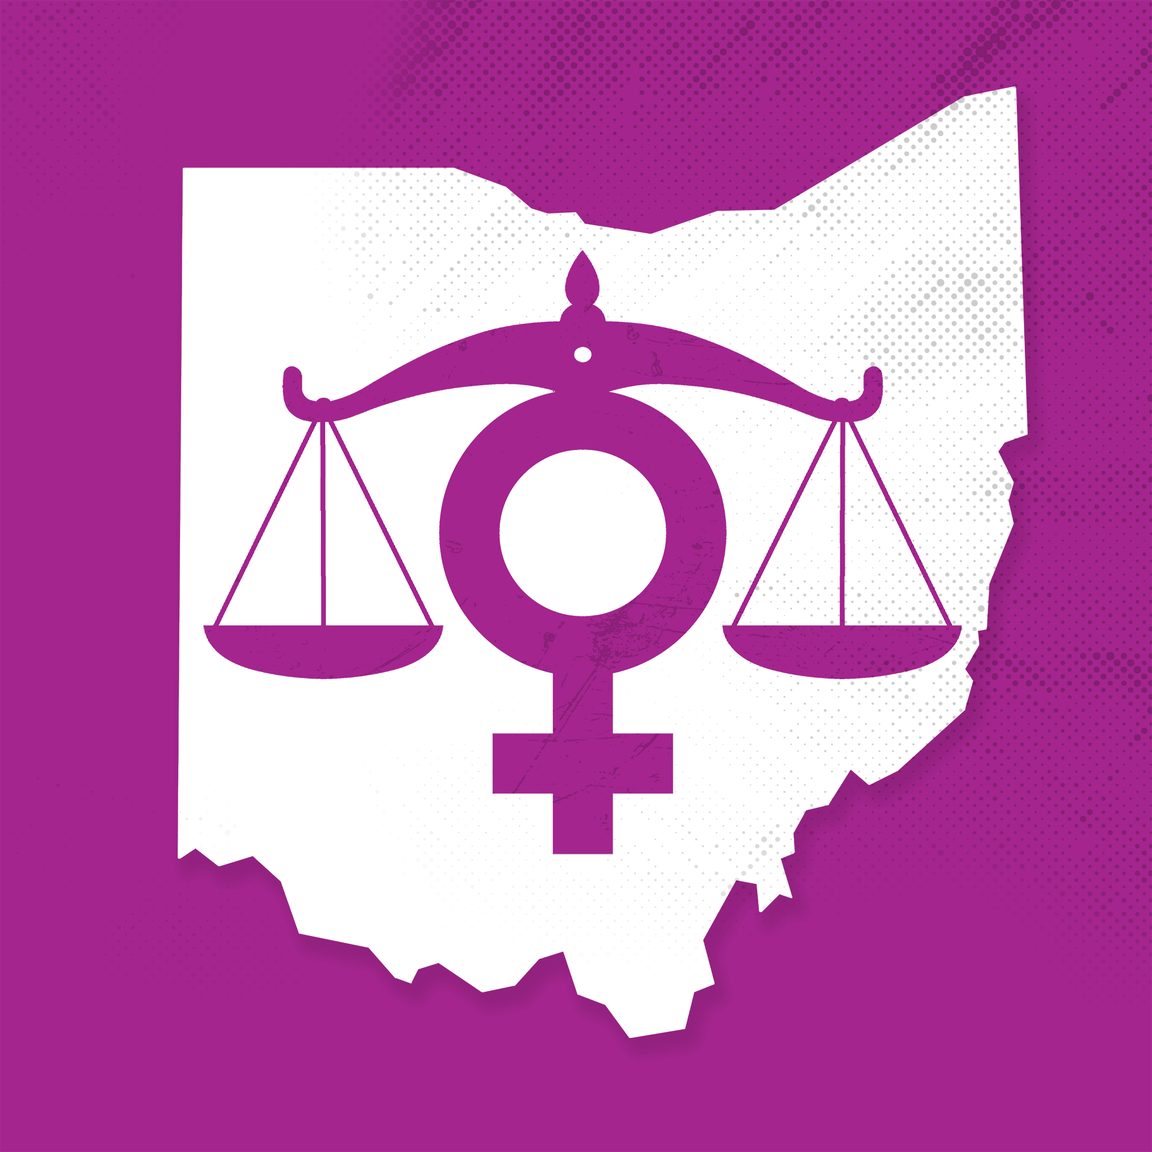 Ohio abortion law started as a fringe idea. PostRoe, it’s reality.